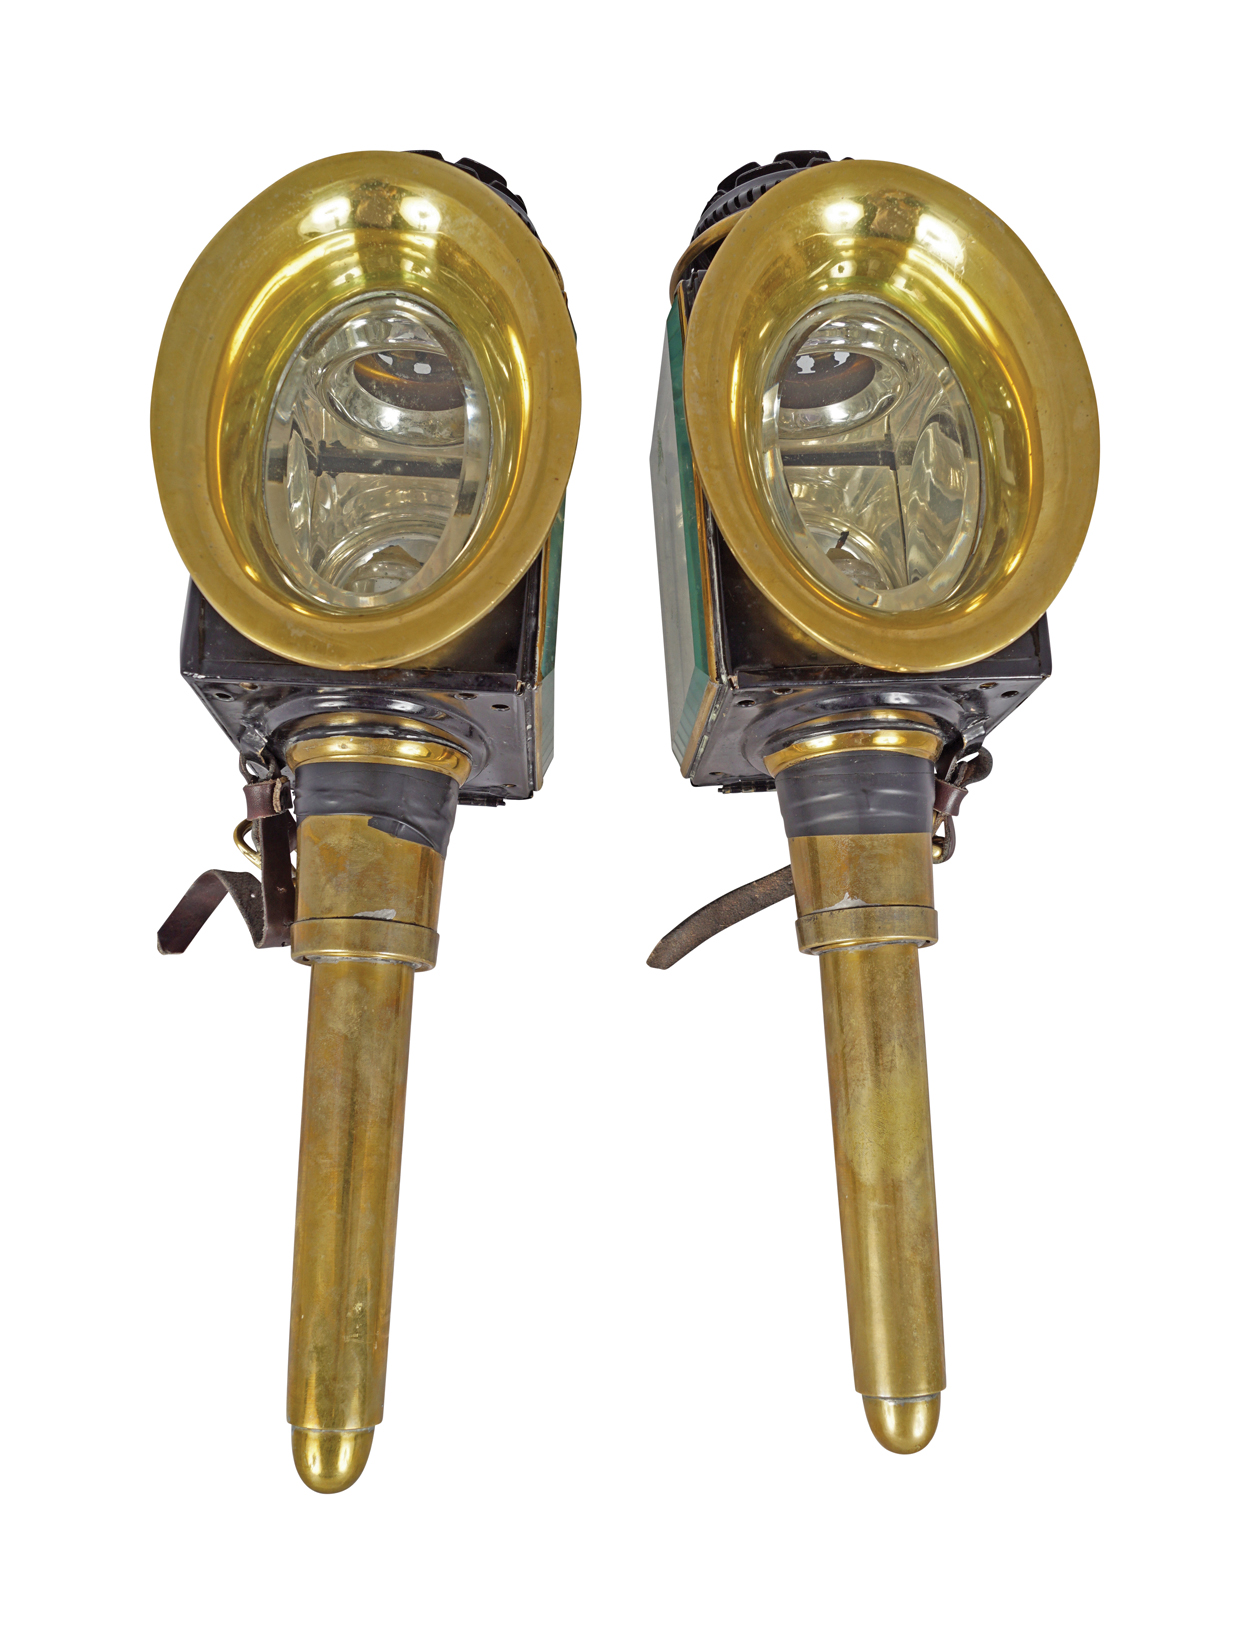 PAIR OF NINETEENTH-CENTURY BRASS AND METAL CARRIAGE LAMPS